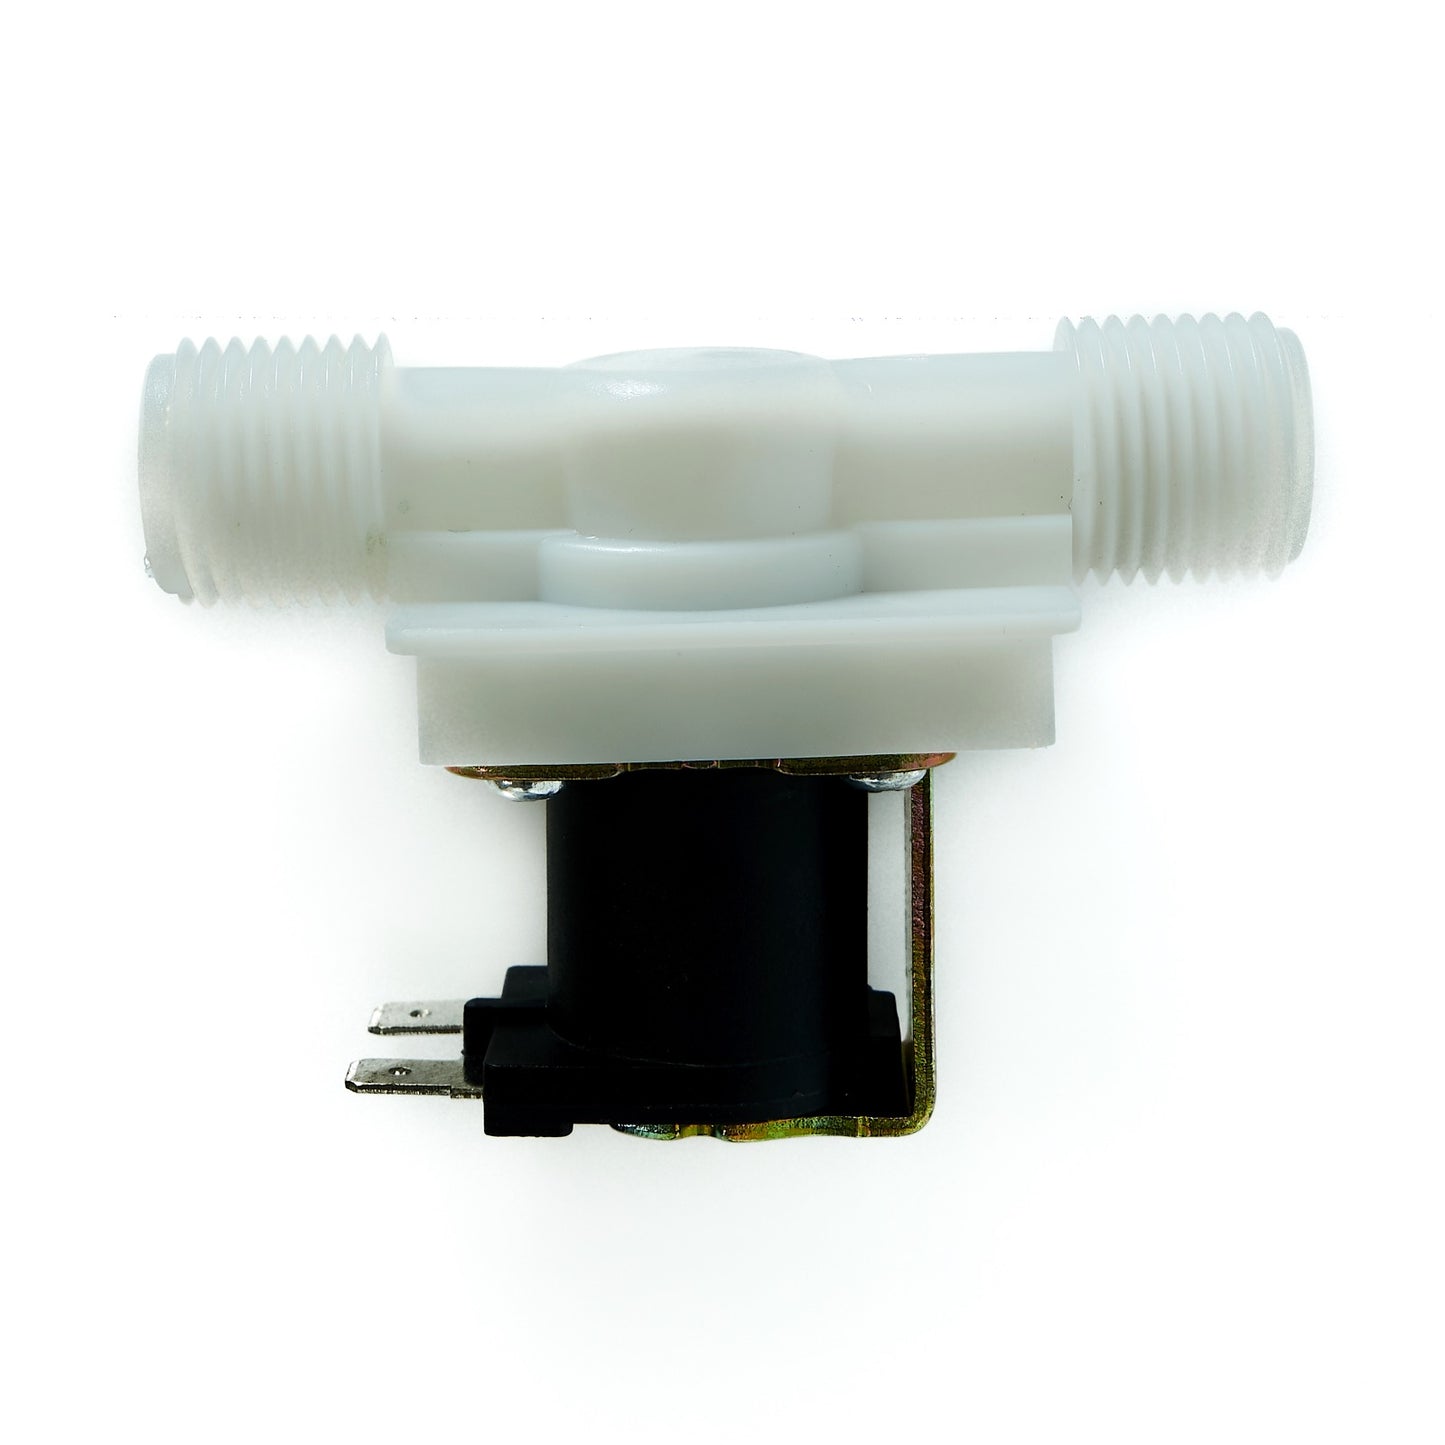 Water Solenoid Valve for 1/2" Outlets